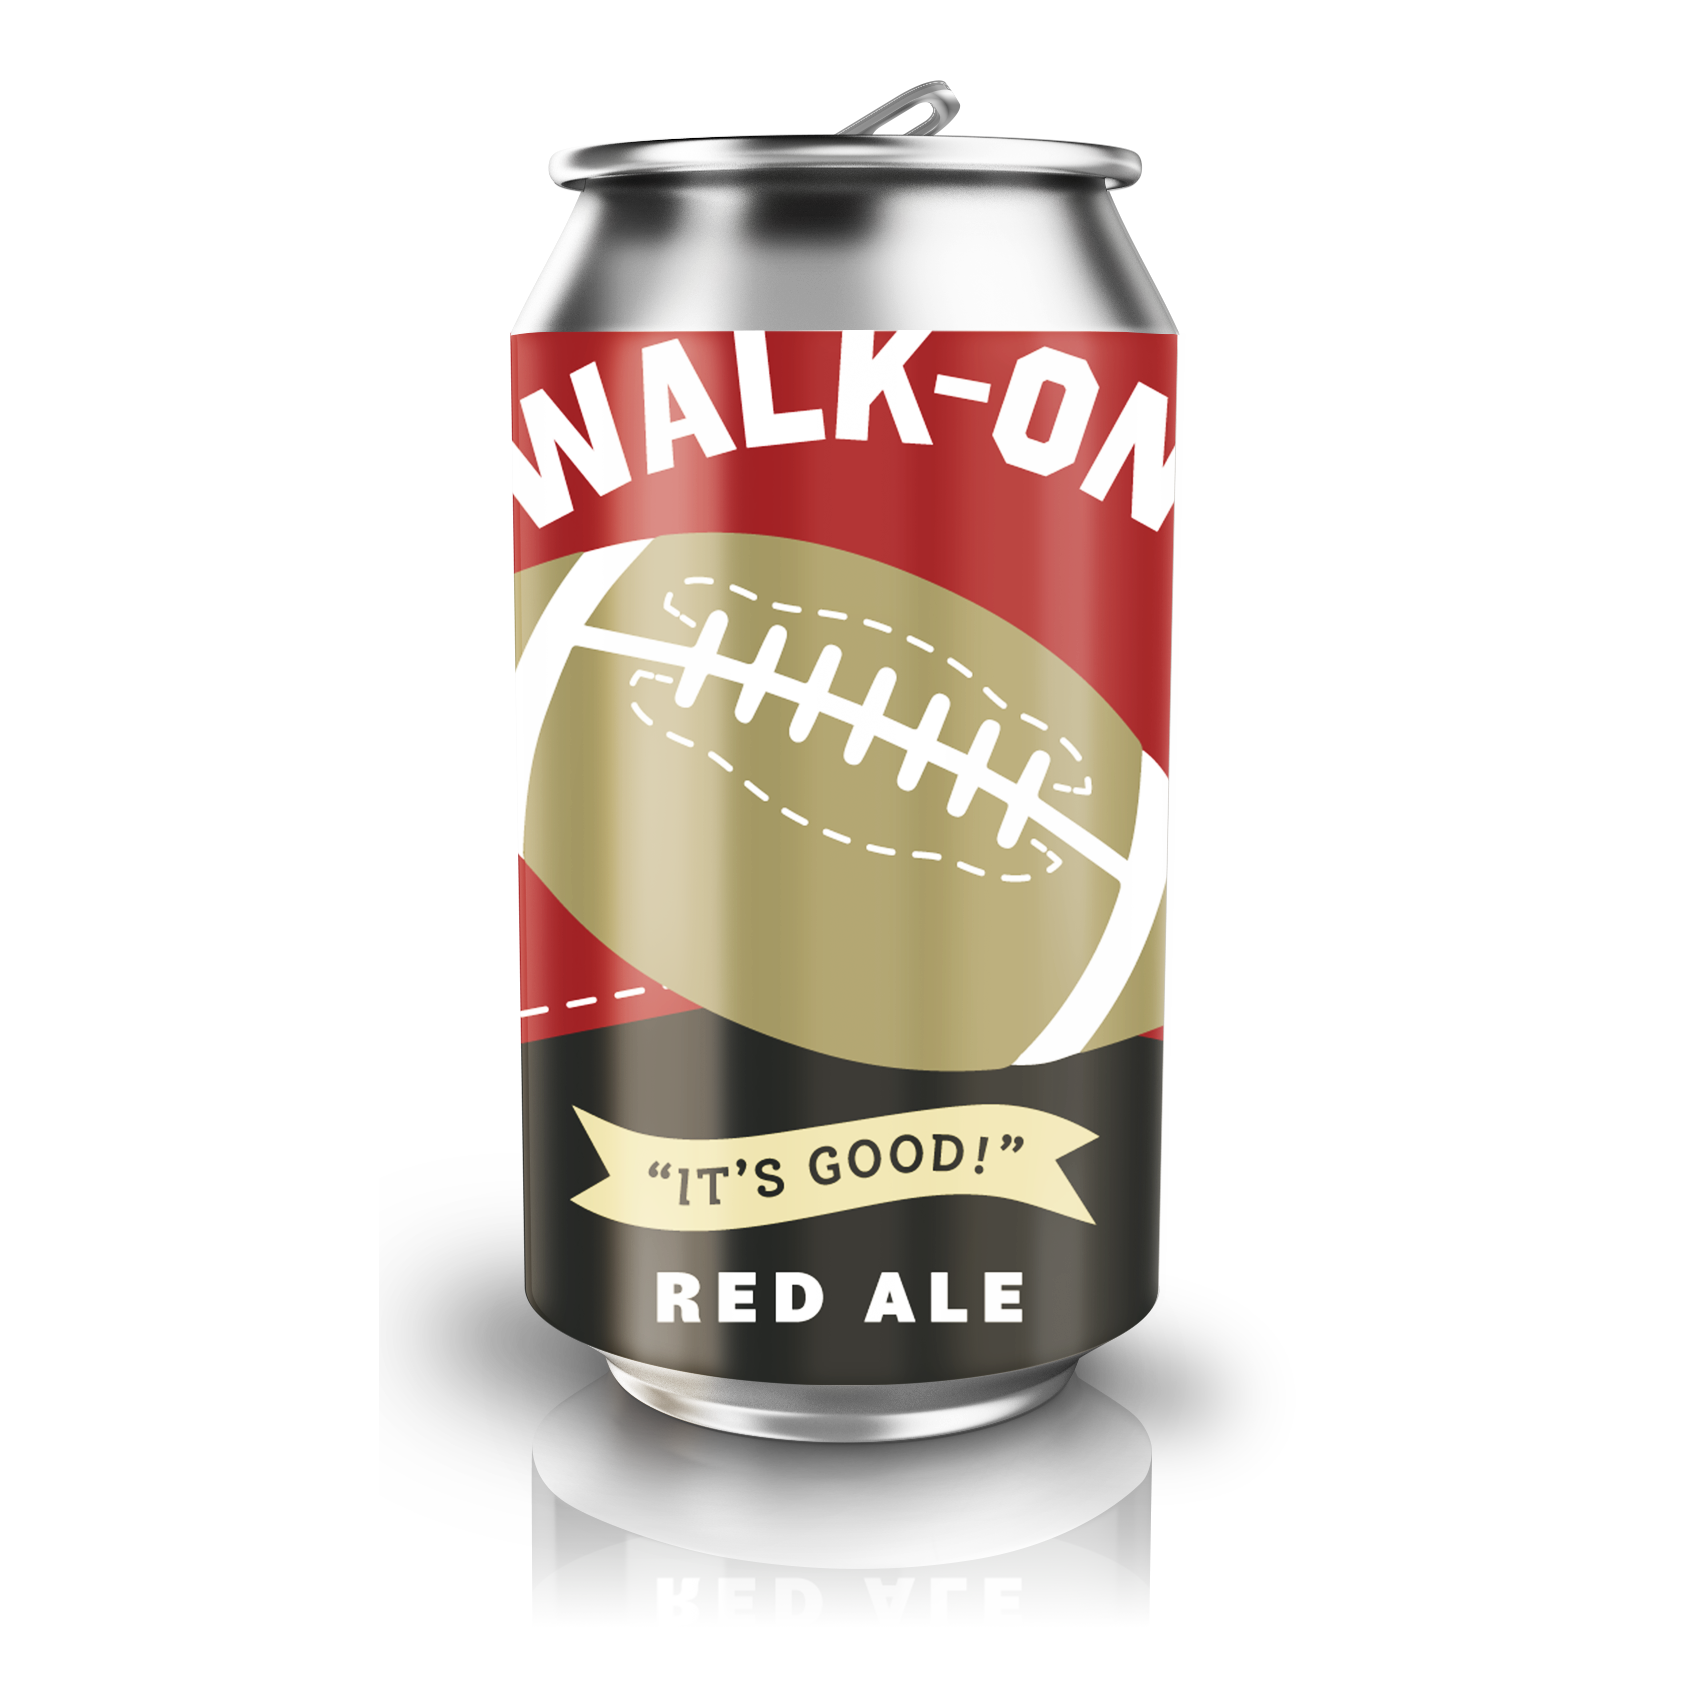 Walk-On Red Ale